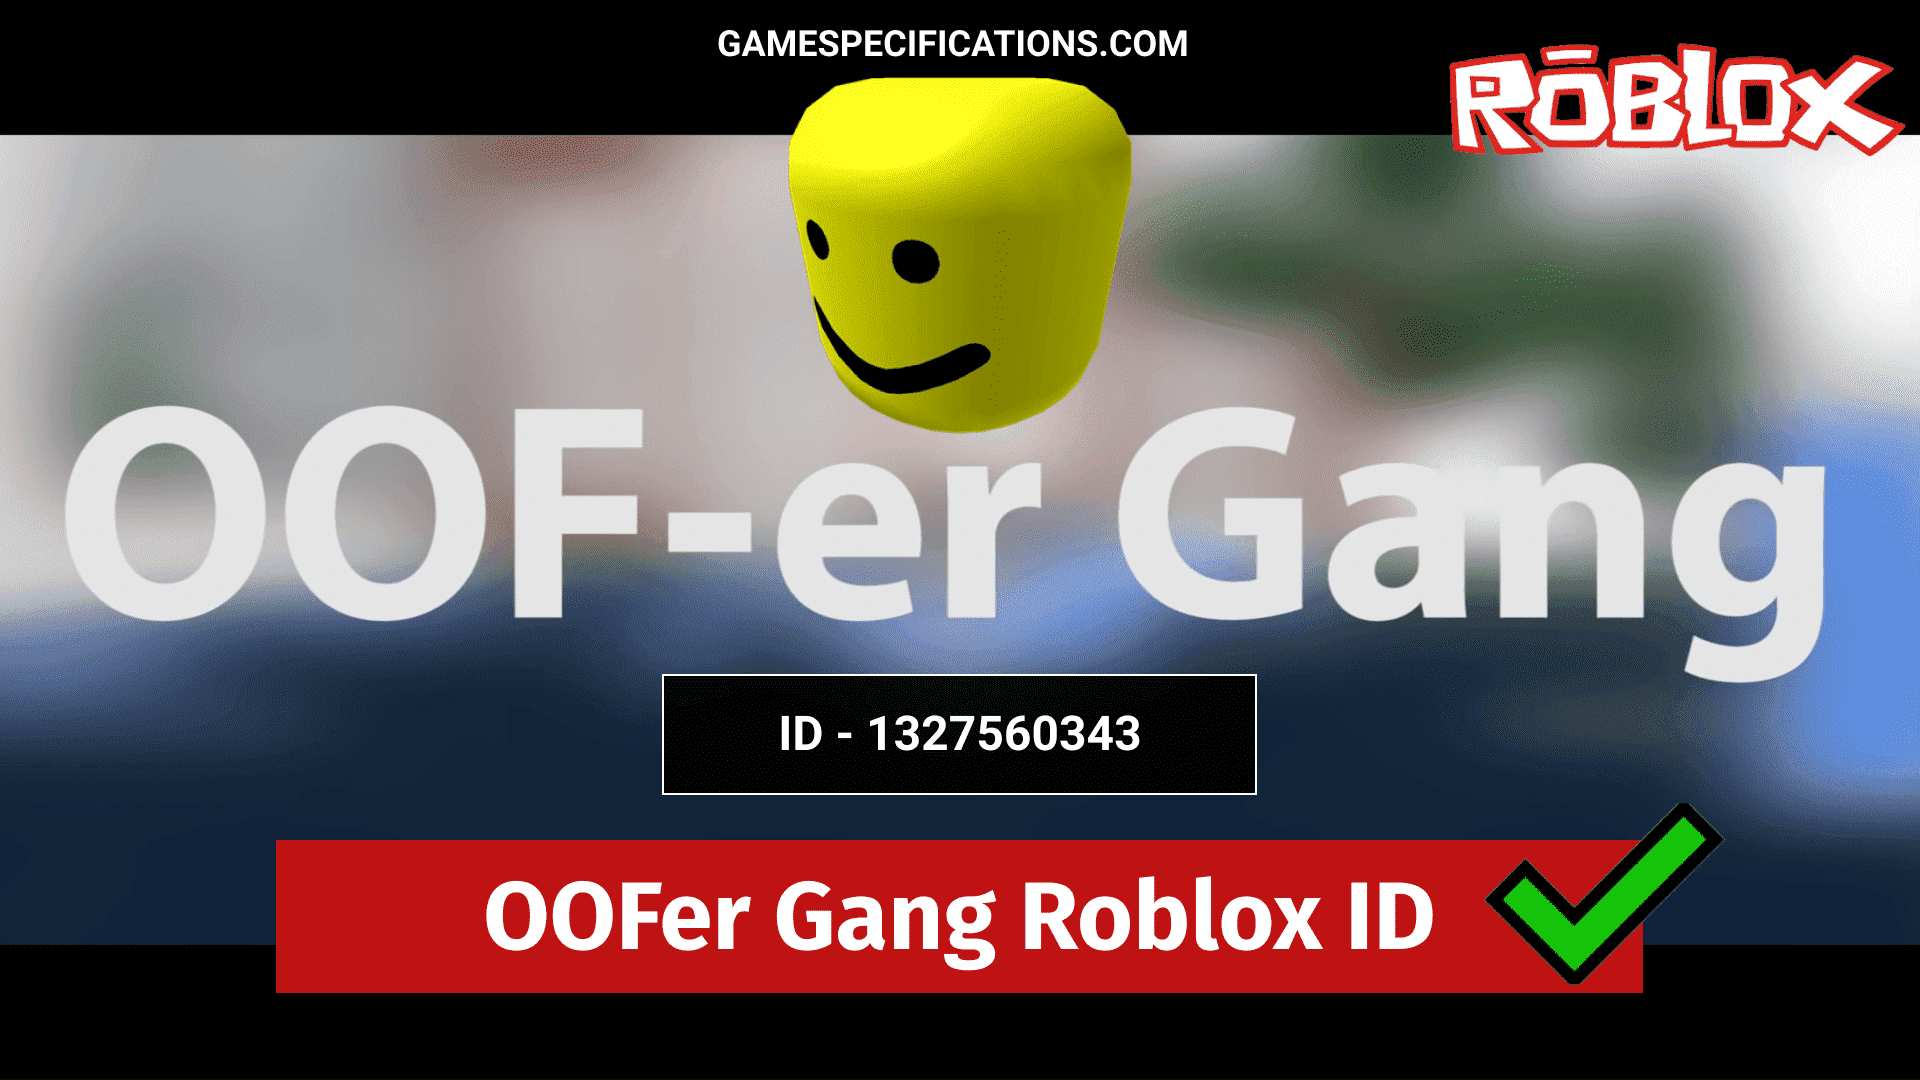 Oofer Gang Roblox Id Codes 2021 Game Specifications - rap songs roblox id